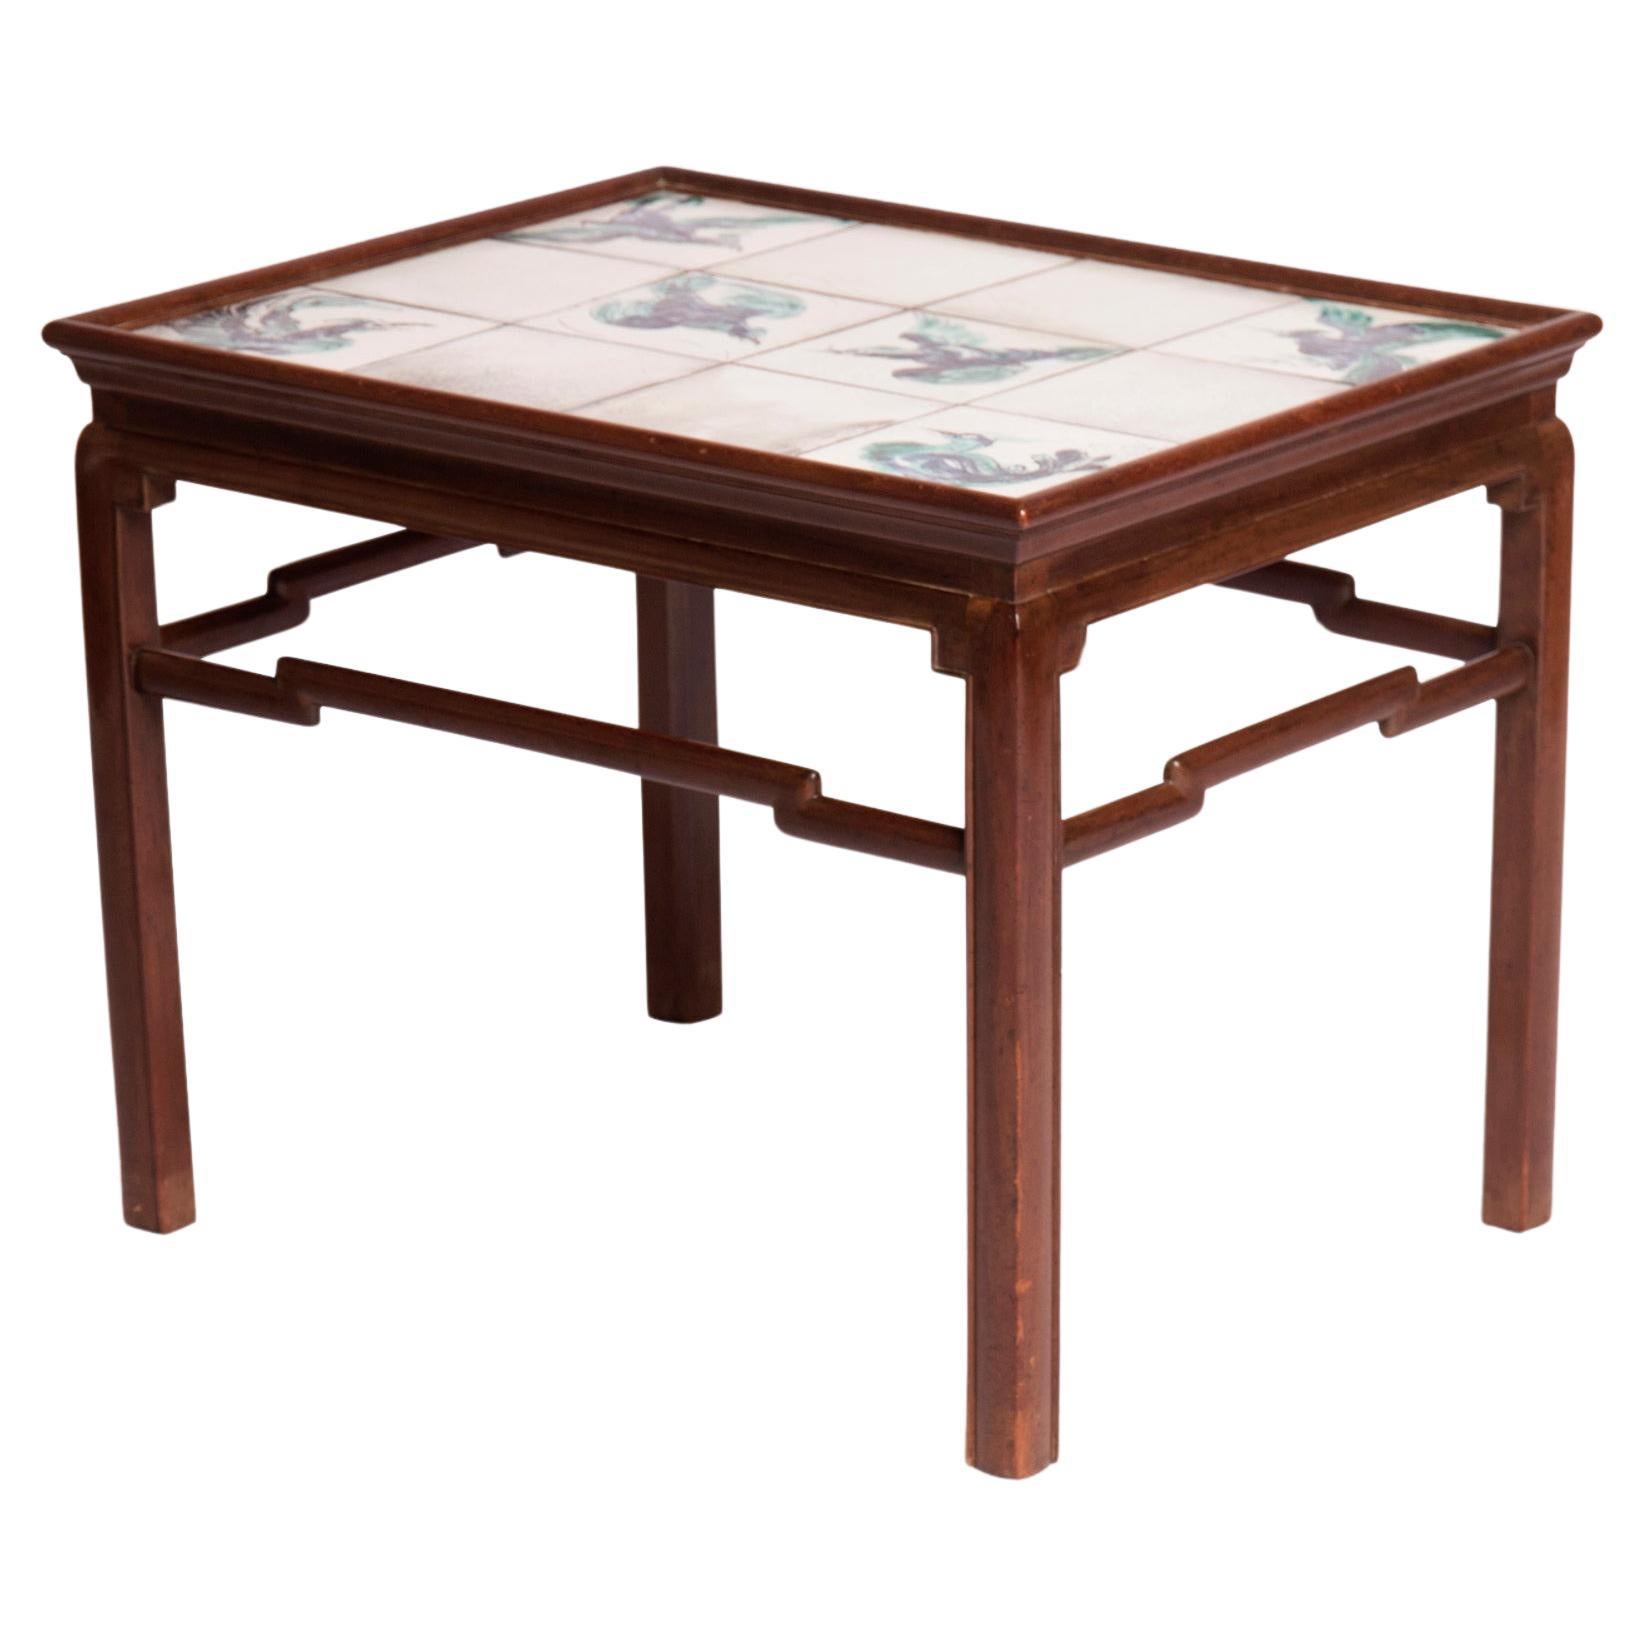 Chinese inspired mahogany coffee table with tiles in white, green, blue nuances For Sale